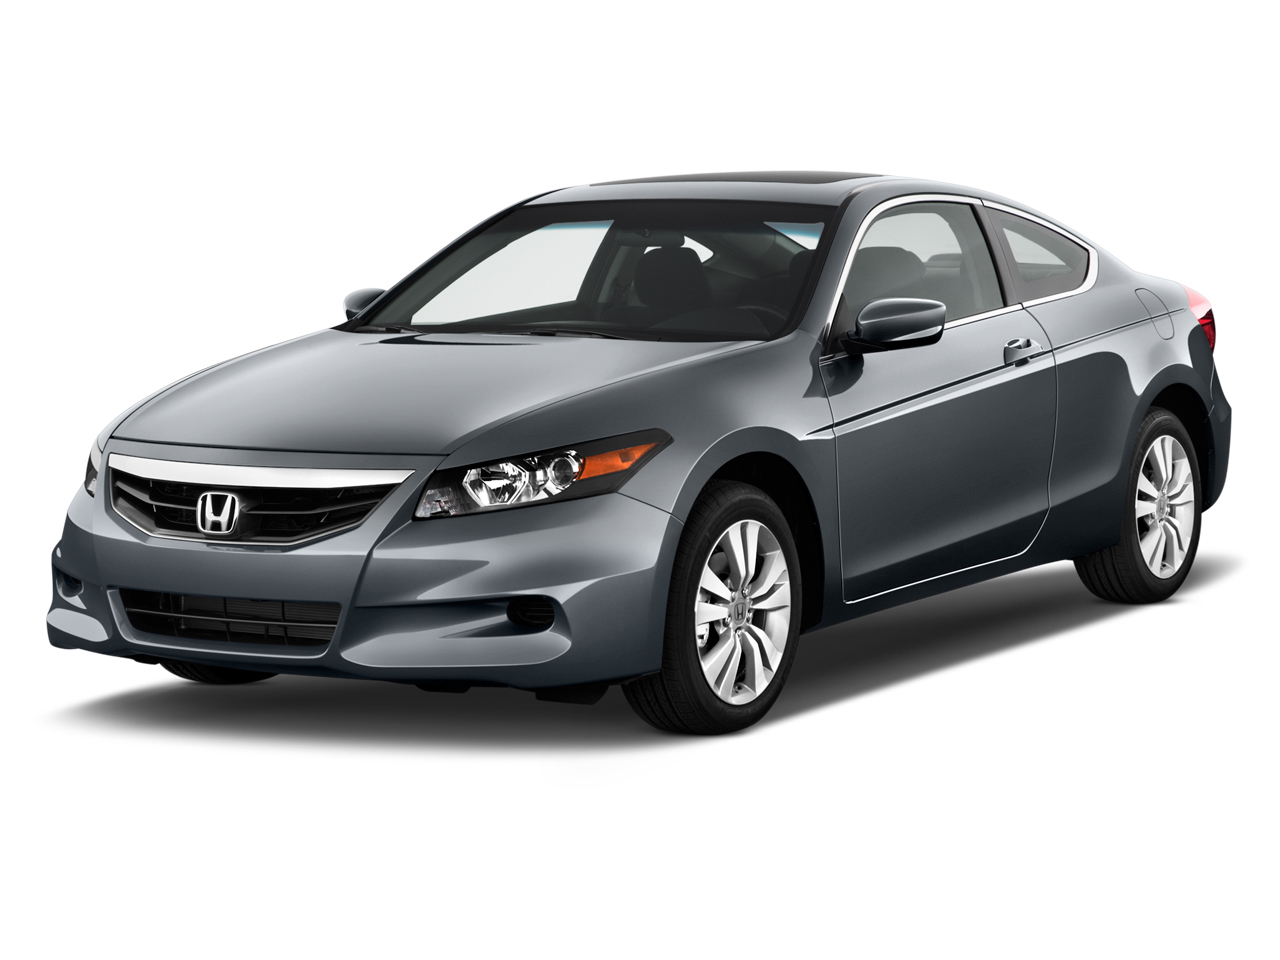 2012 Honda Accord Coupe Review Ratings Specs Prices And Photos